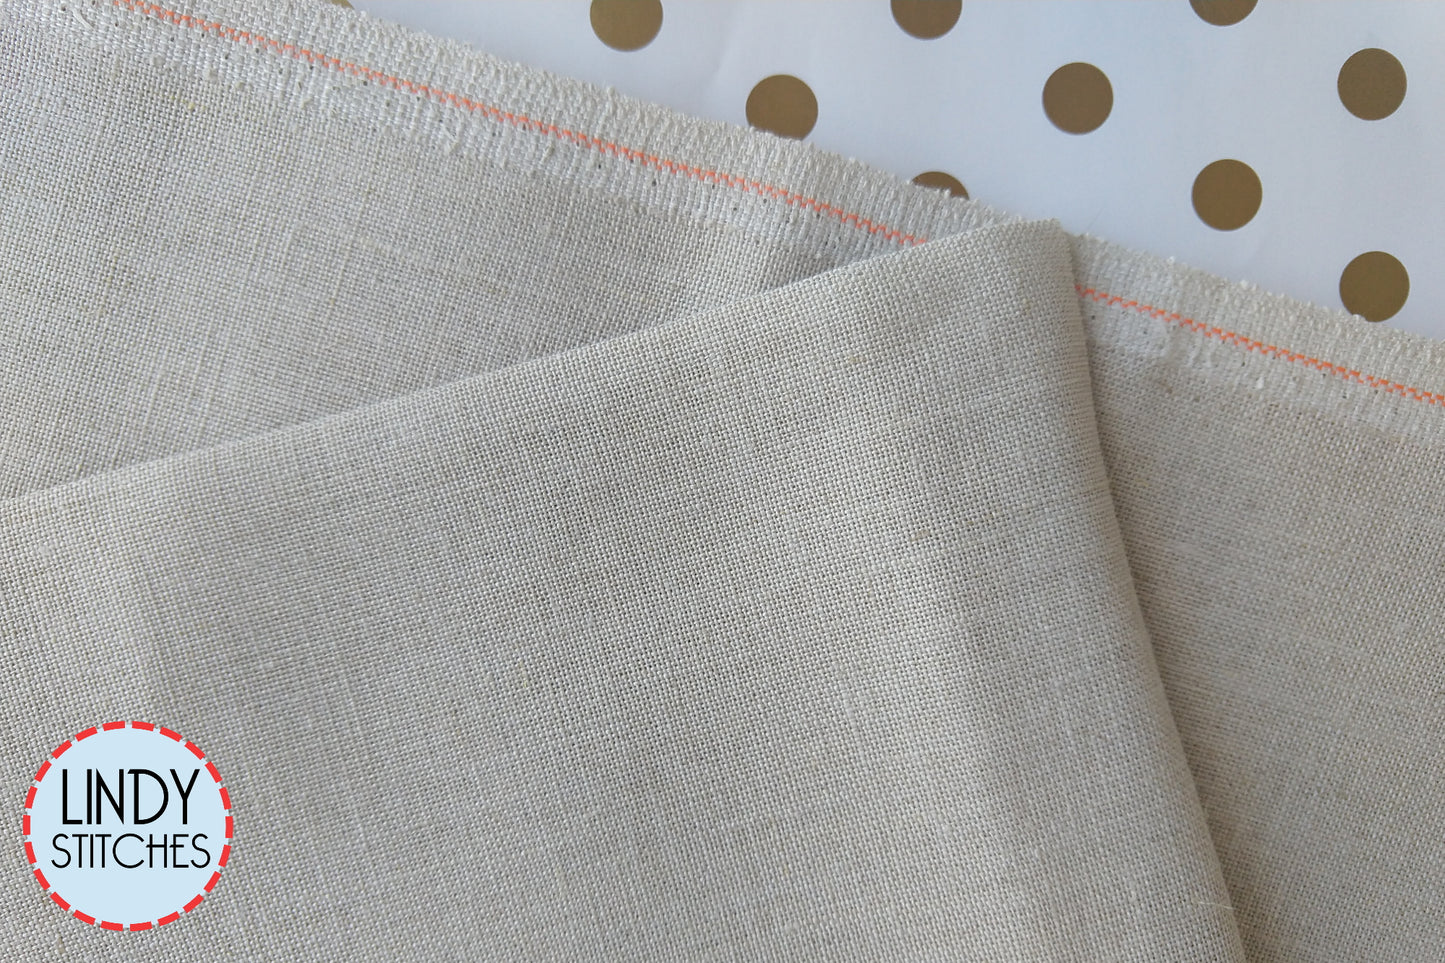 SKINNY CUTS!  Long Pieces of Fabric for your vertical projects